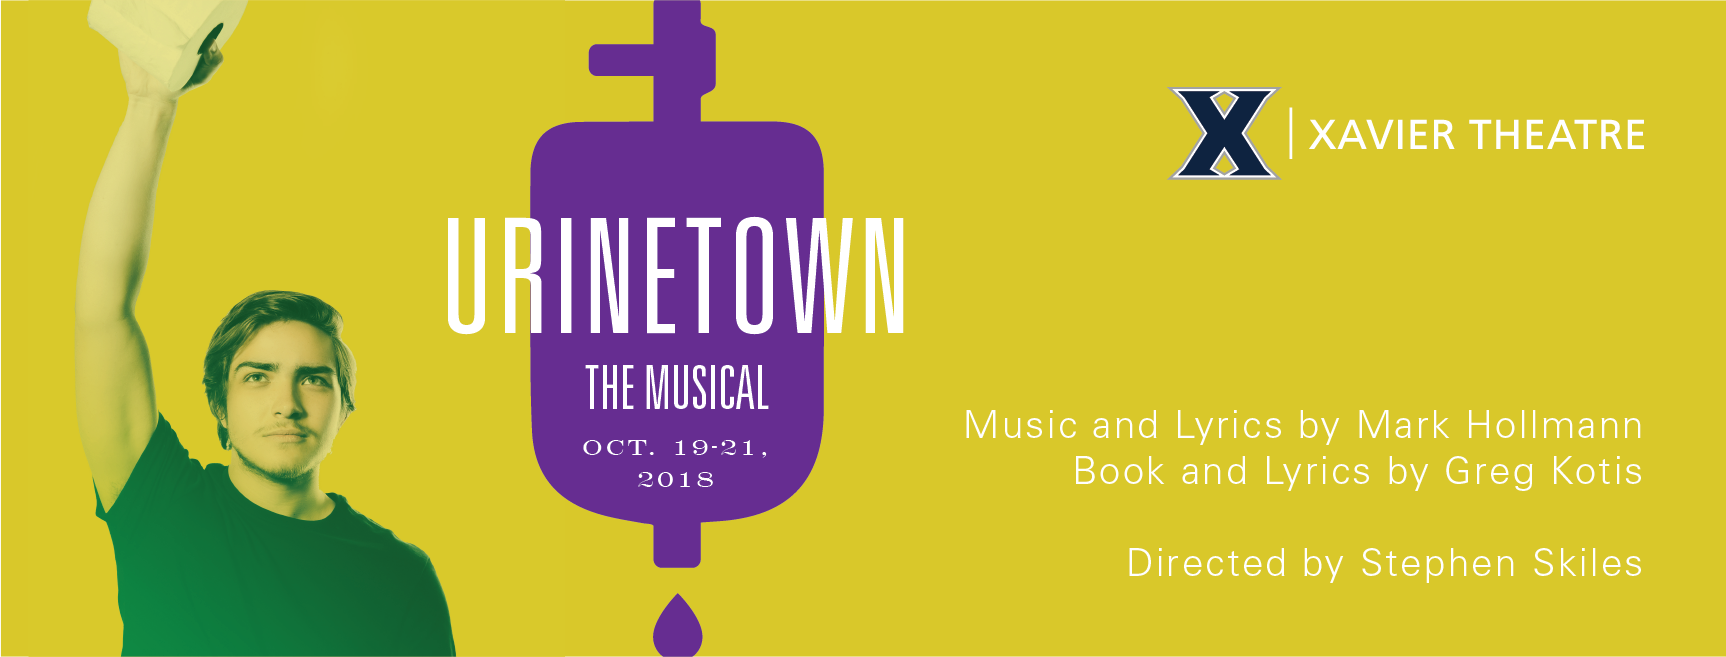 Poster for Urinetown, The Musical, with a person raising their hand